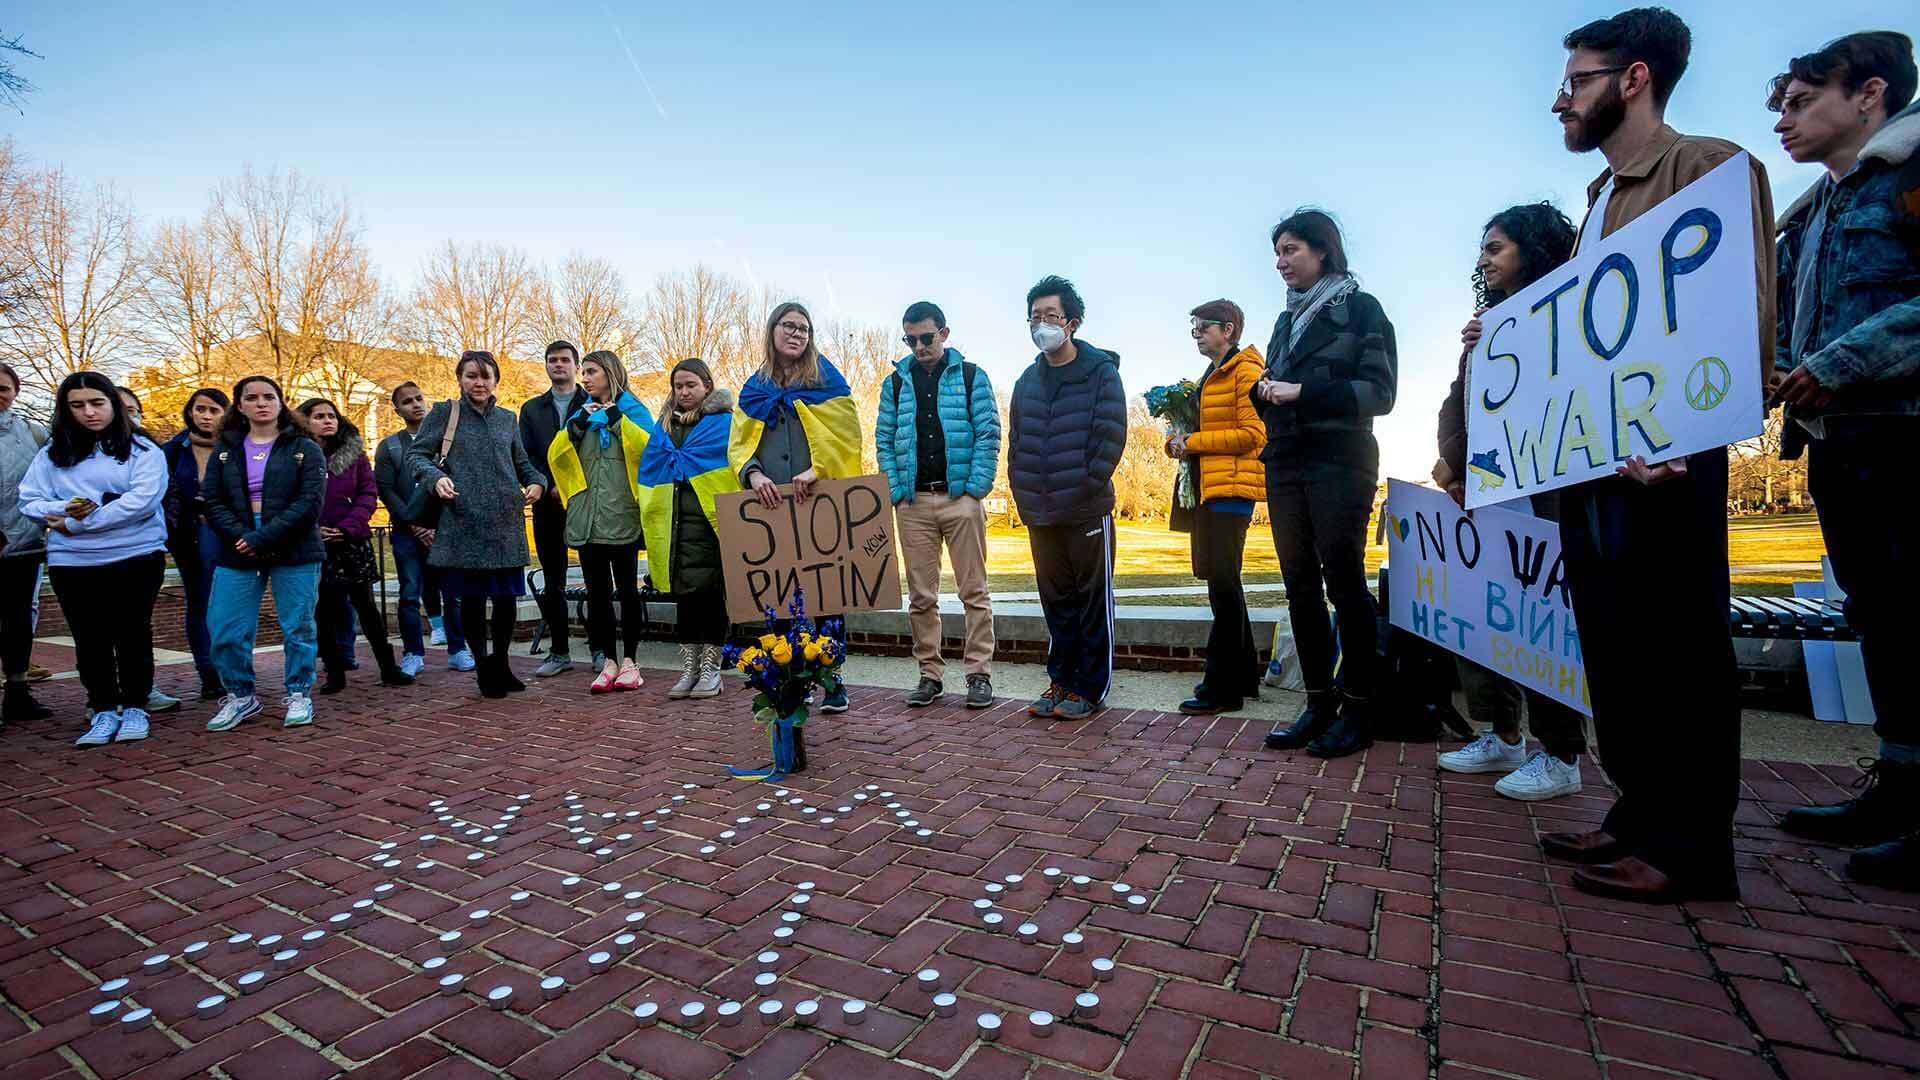 Students gather at Ukraine peace rally